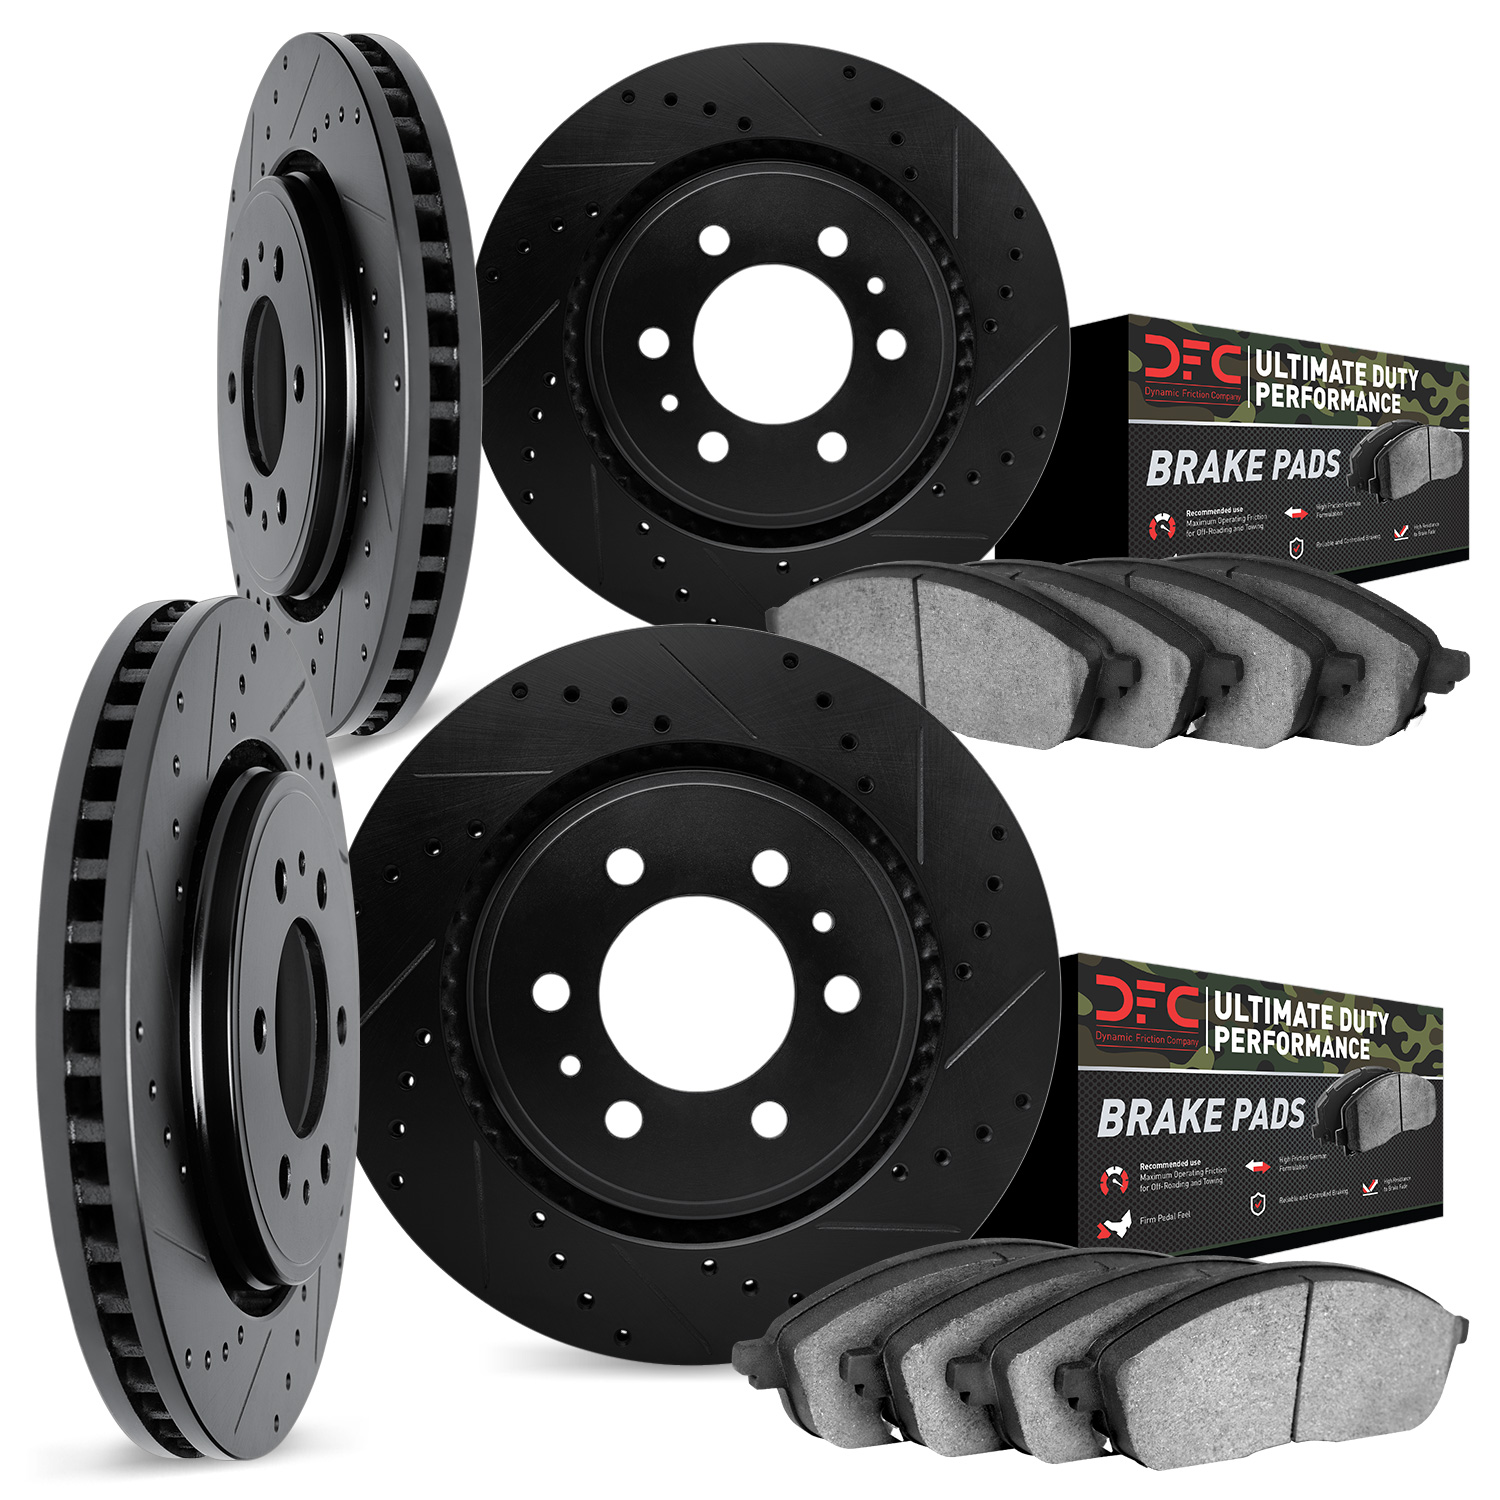 8404-48003 Drilled/Slotted Brake Rotors with Ultimate-Duty Brake Pads Kit [Black], 1999-2007 GM, Position: Front and Rear